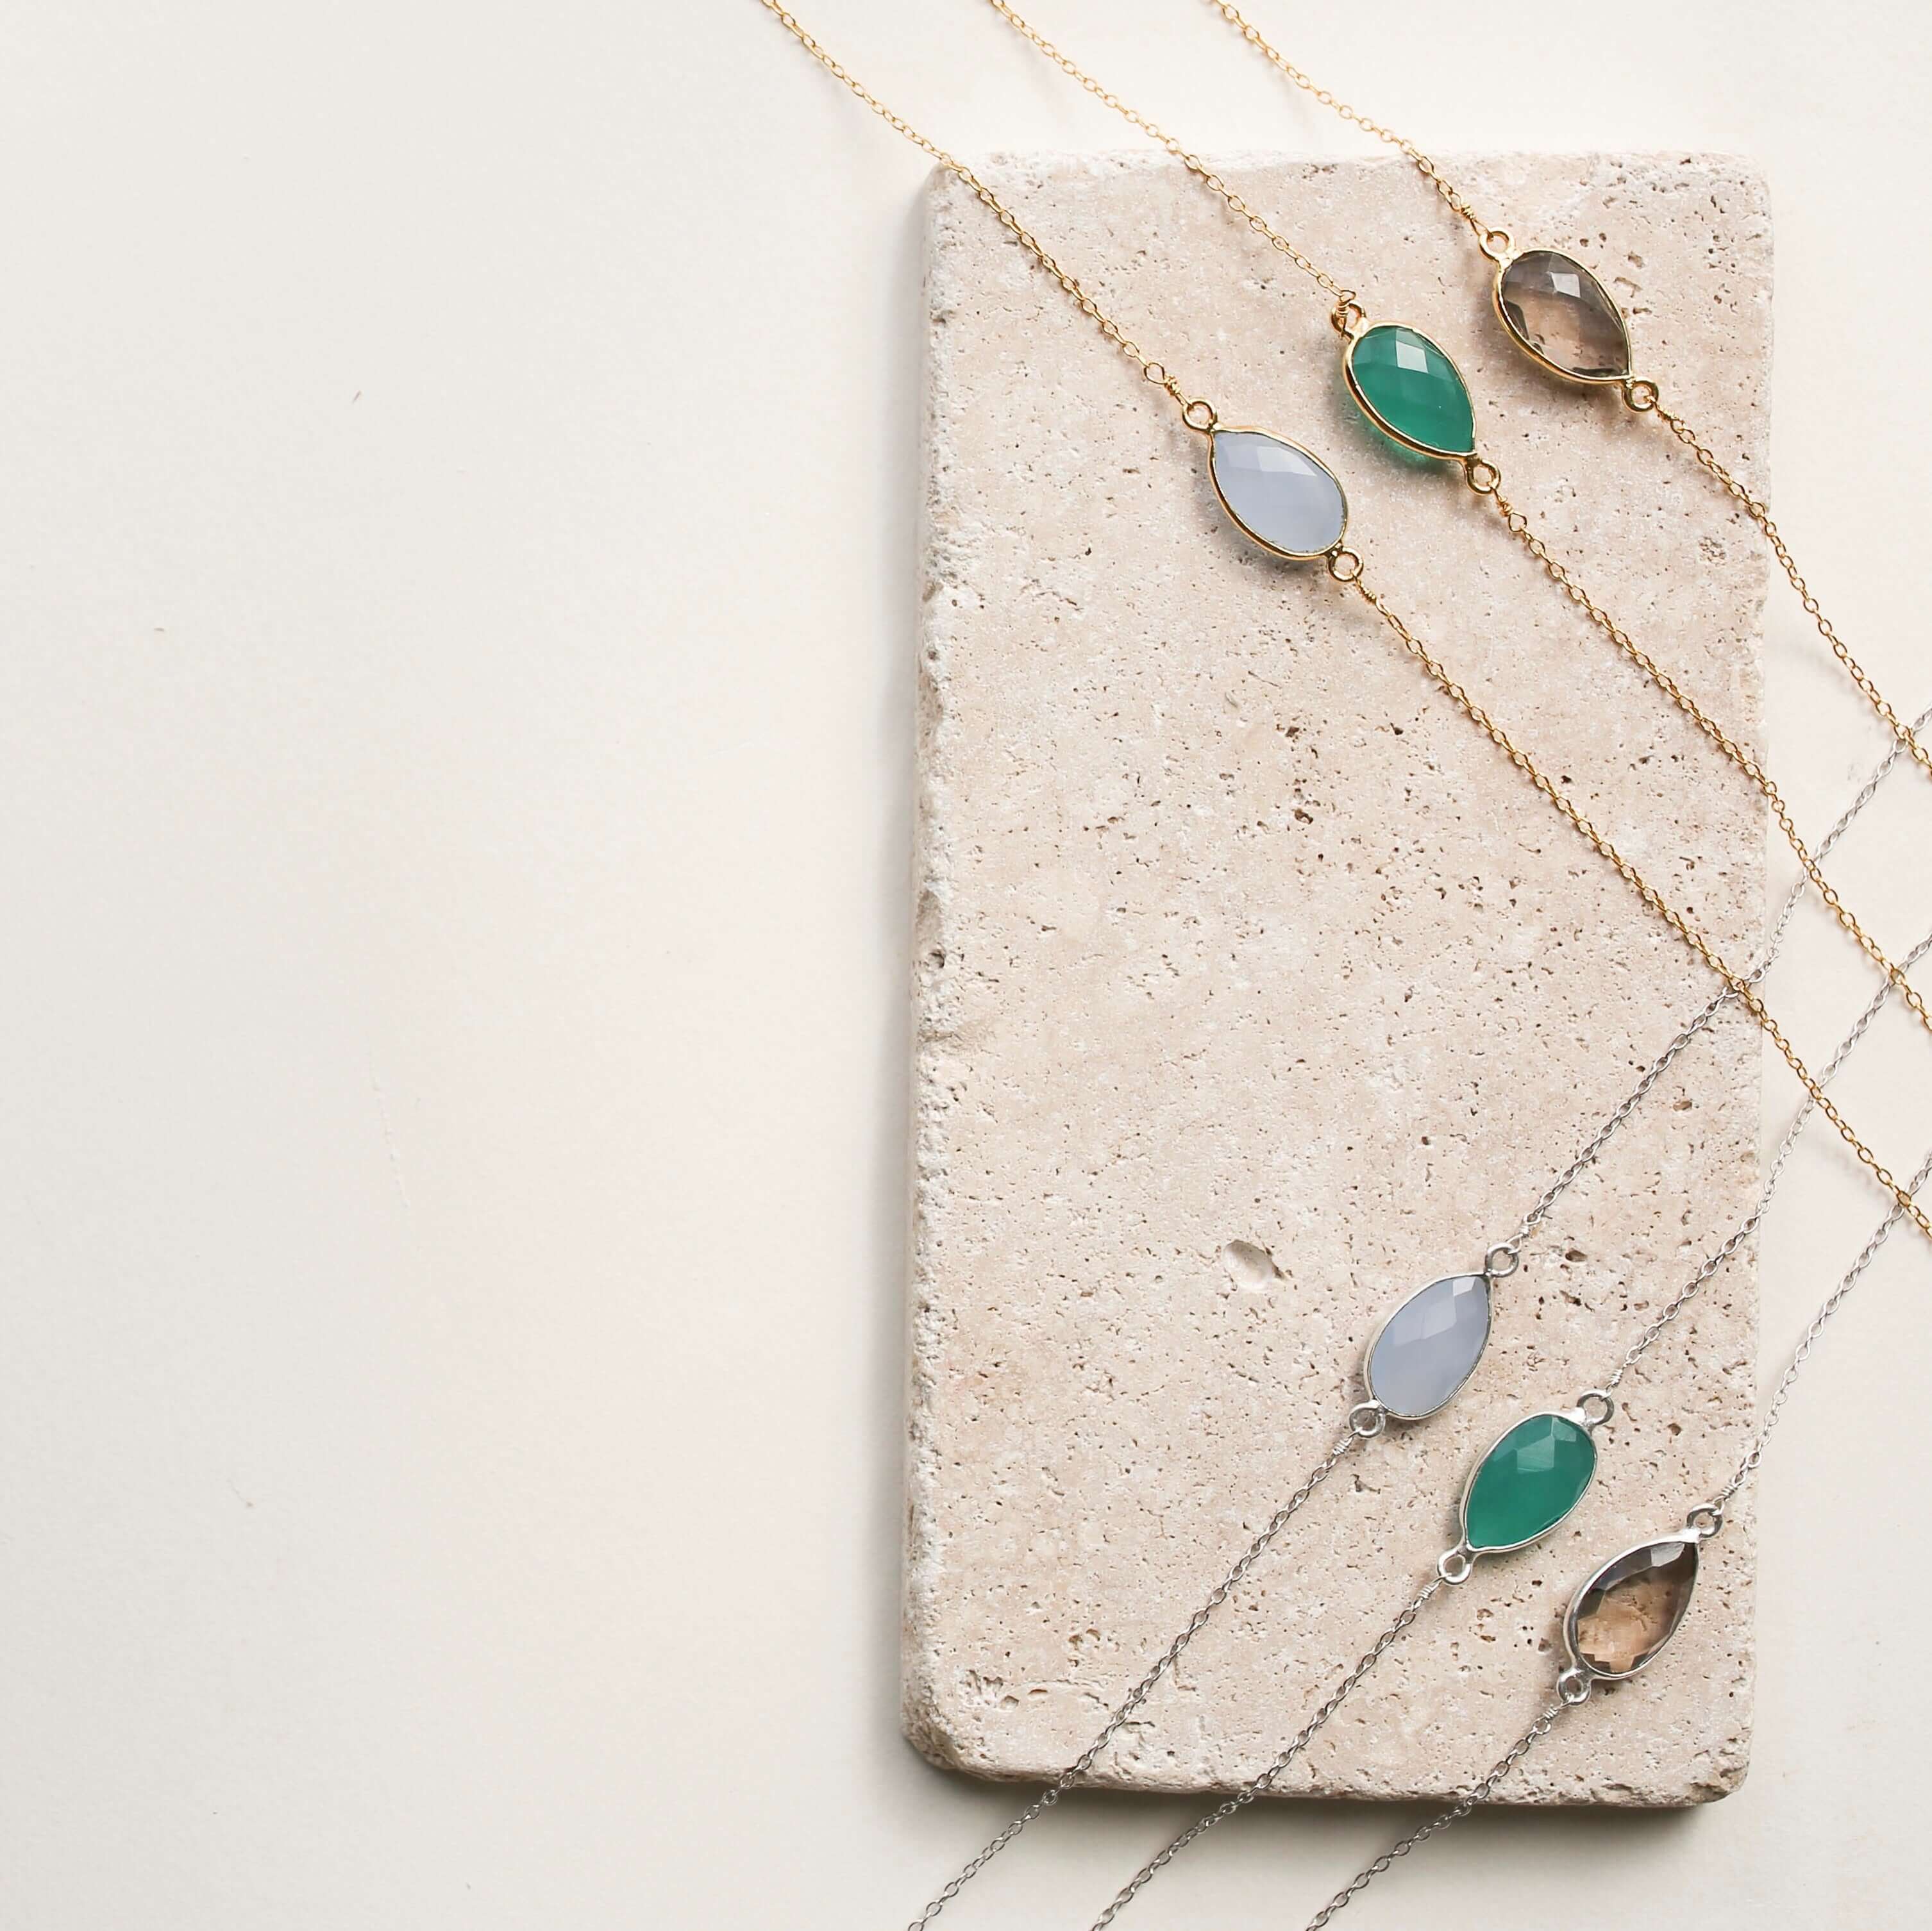 Colorful Gold Minimalist Necklaces